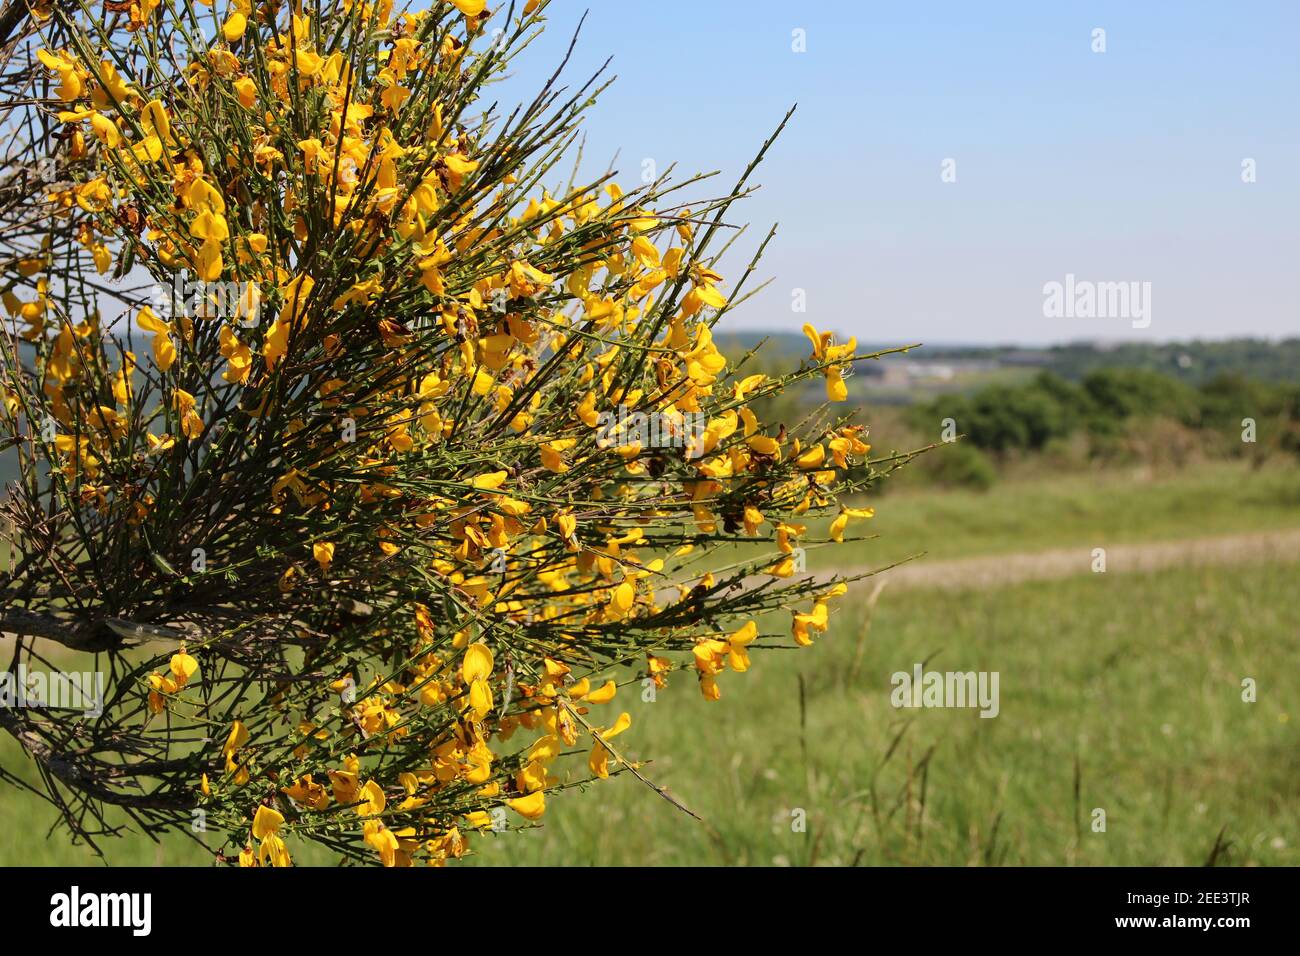 Scotch broom with yellow flowers growing in the field; a plant in the background with a copy space Stock Photo